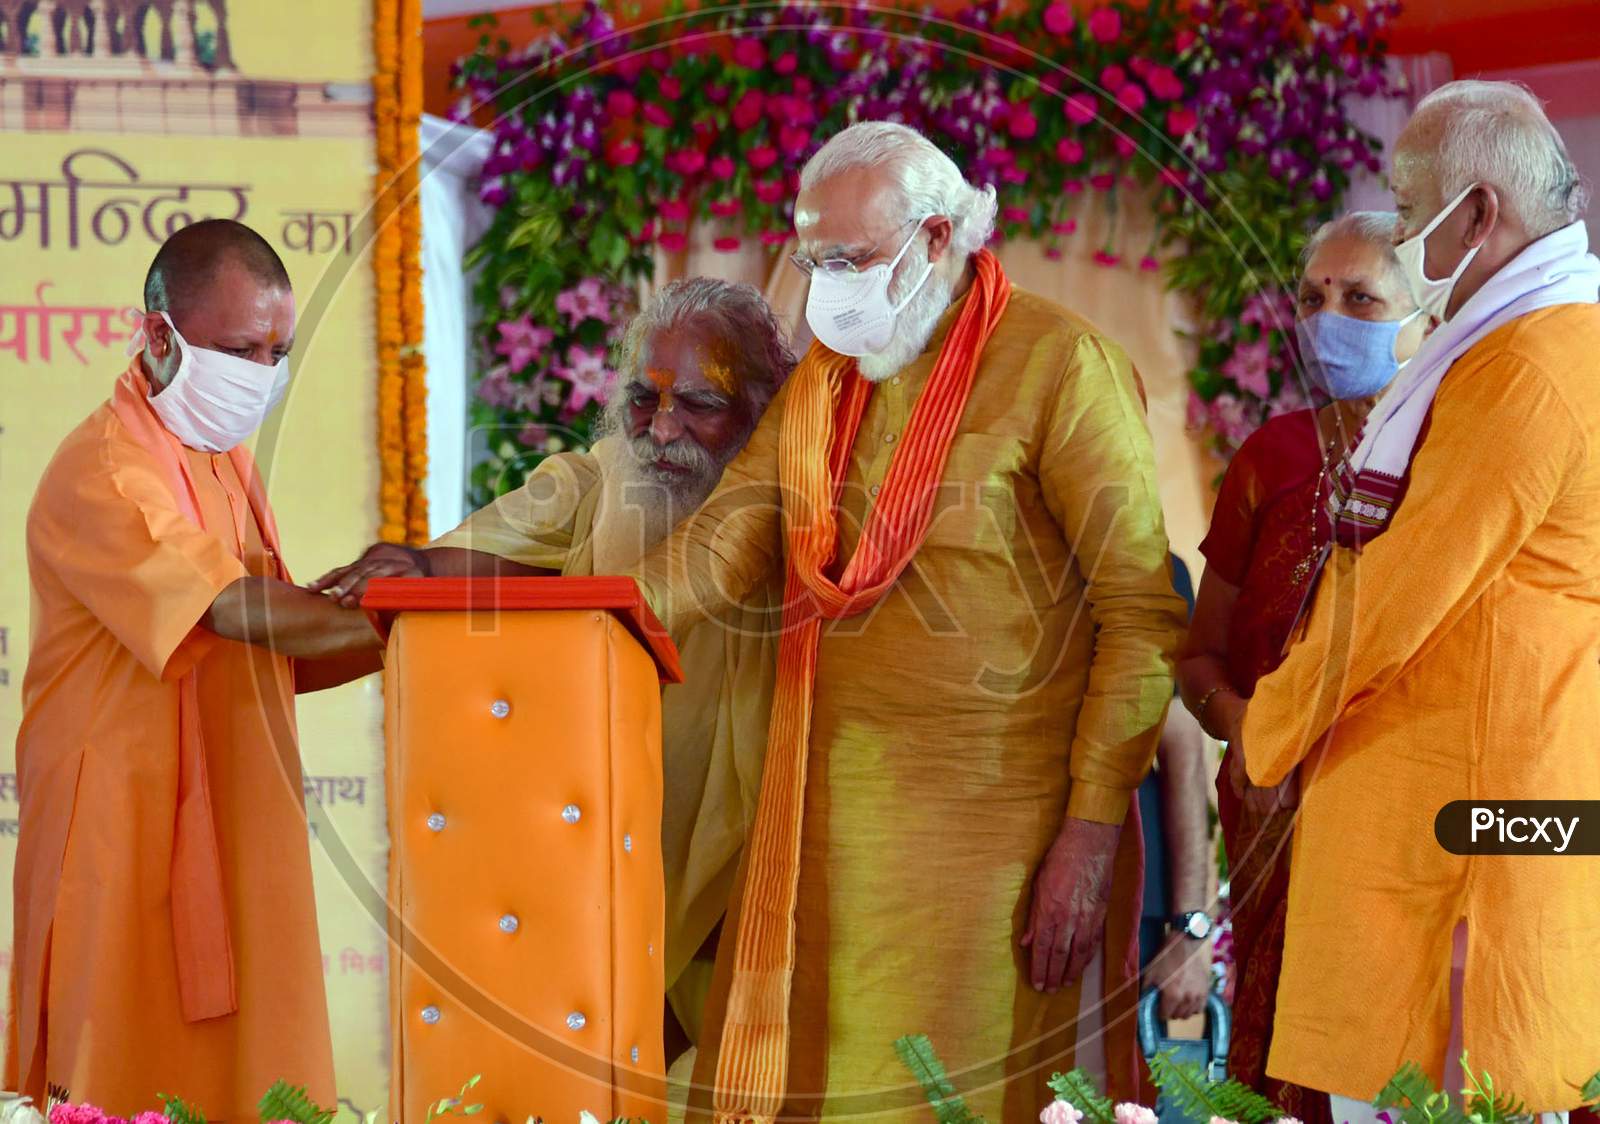 PM Narendra Modi, UP CM Yogi Adityanath, RSS chief Mohan Bhagwat, UP Governor Anandiben Patel and Nritya Gopal Das Launch the commemorative Postal Stamp after the foundation laying ceremony for the Hindu Lord Ram's temple, in Ayodhya, India, August 5, 2020.